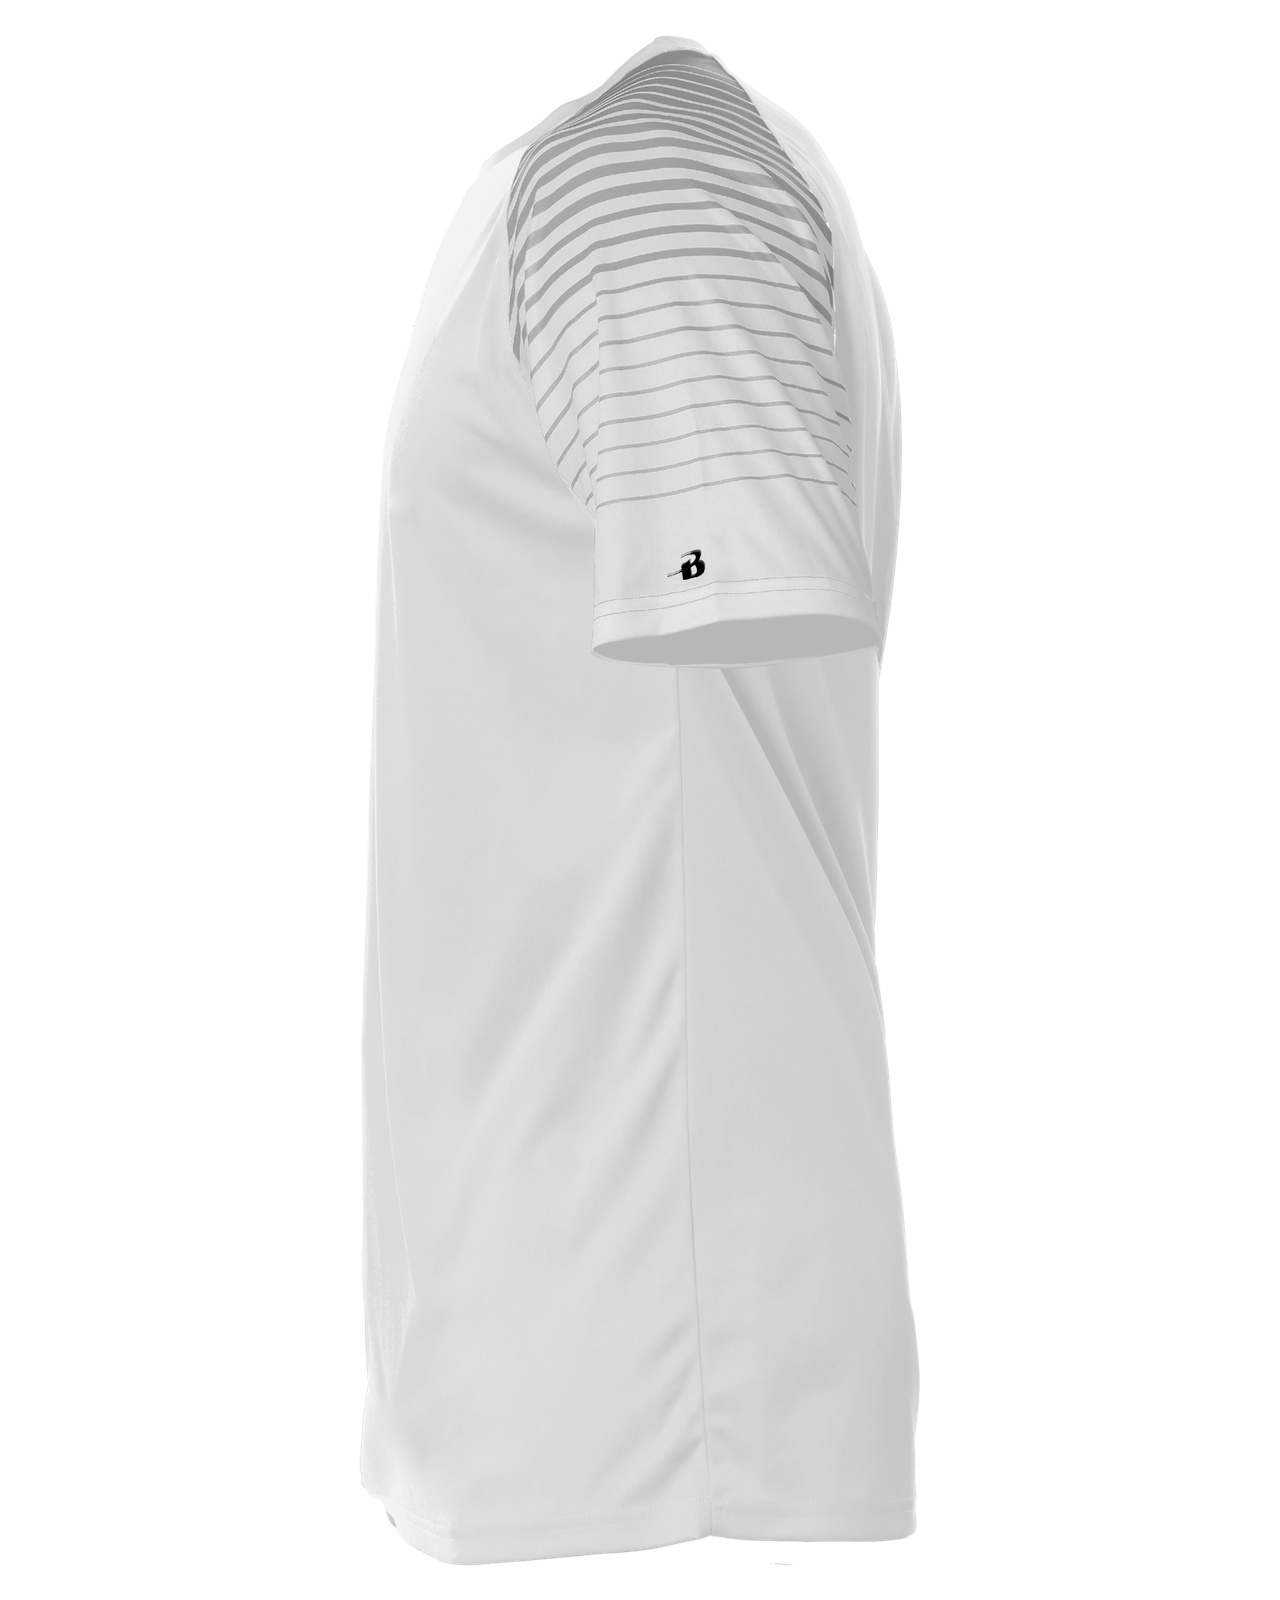 Badger Sport 4210 Lineup Tee - White Silver - HIT a Double - 1